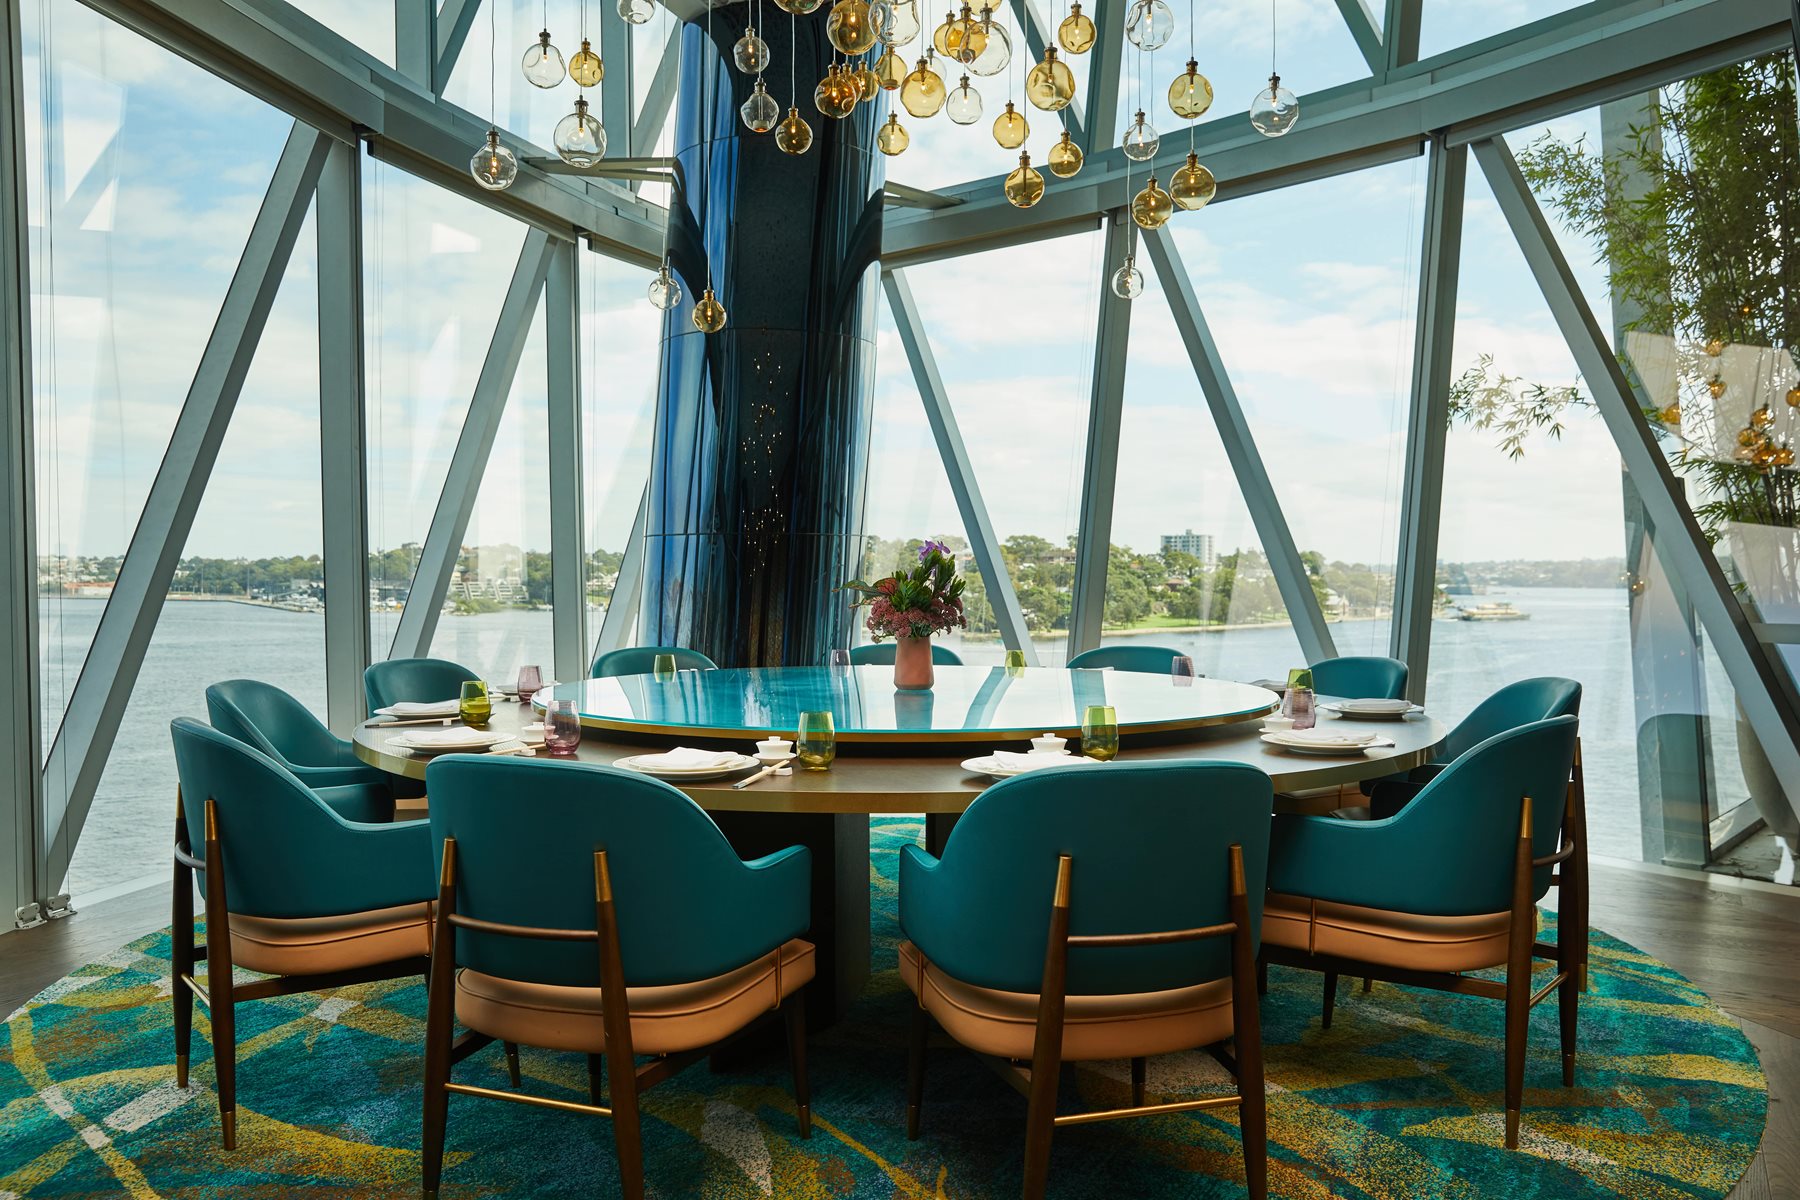 Silks restaurant dining table with a view
